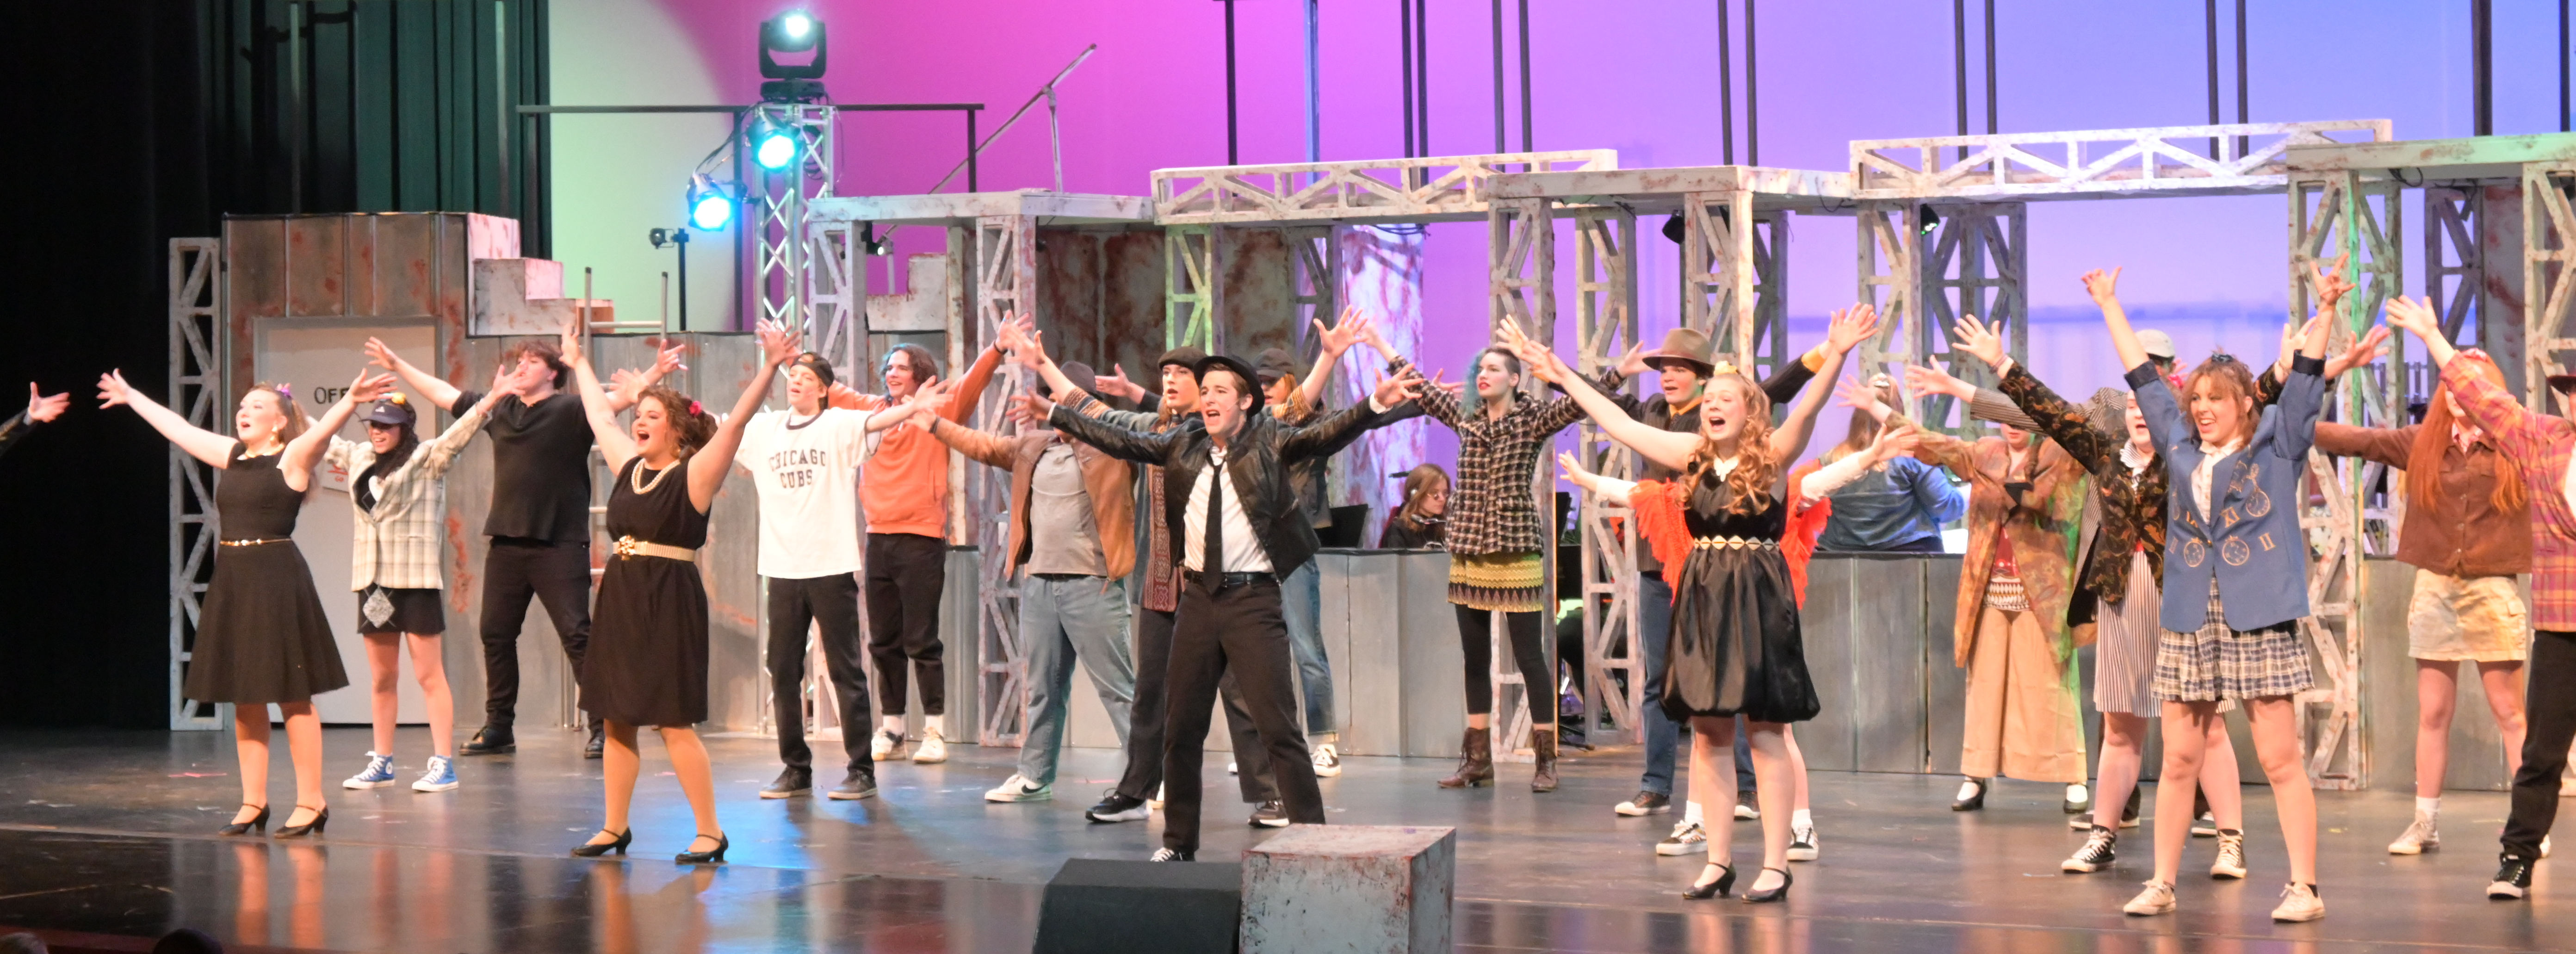 footloose musical cast at paw paw high school